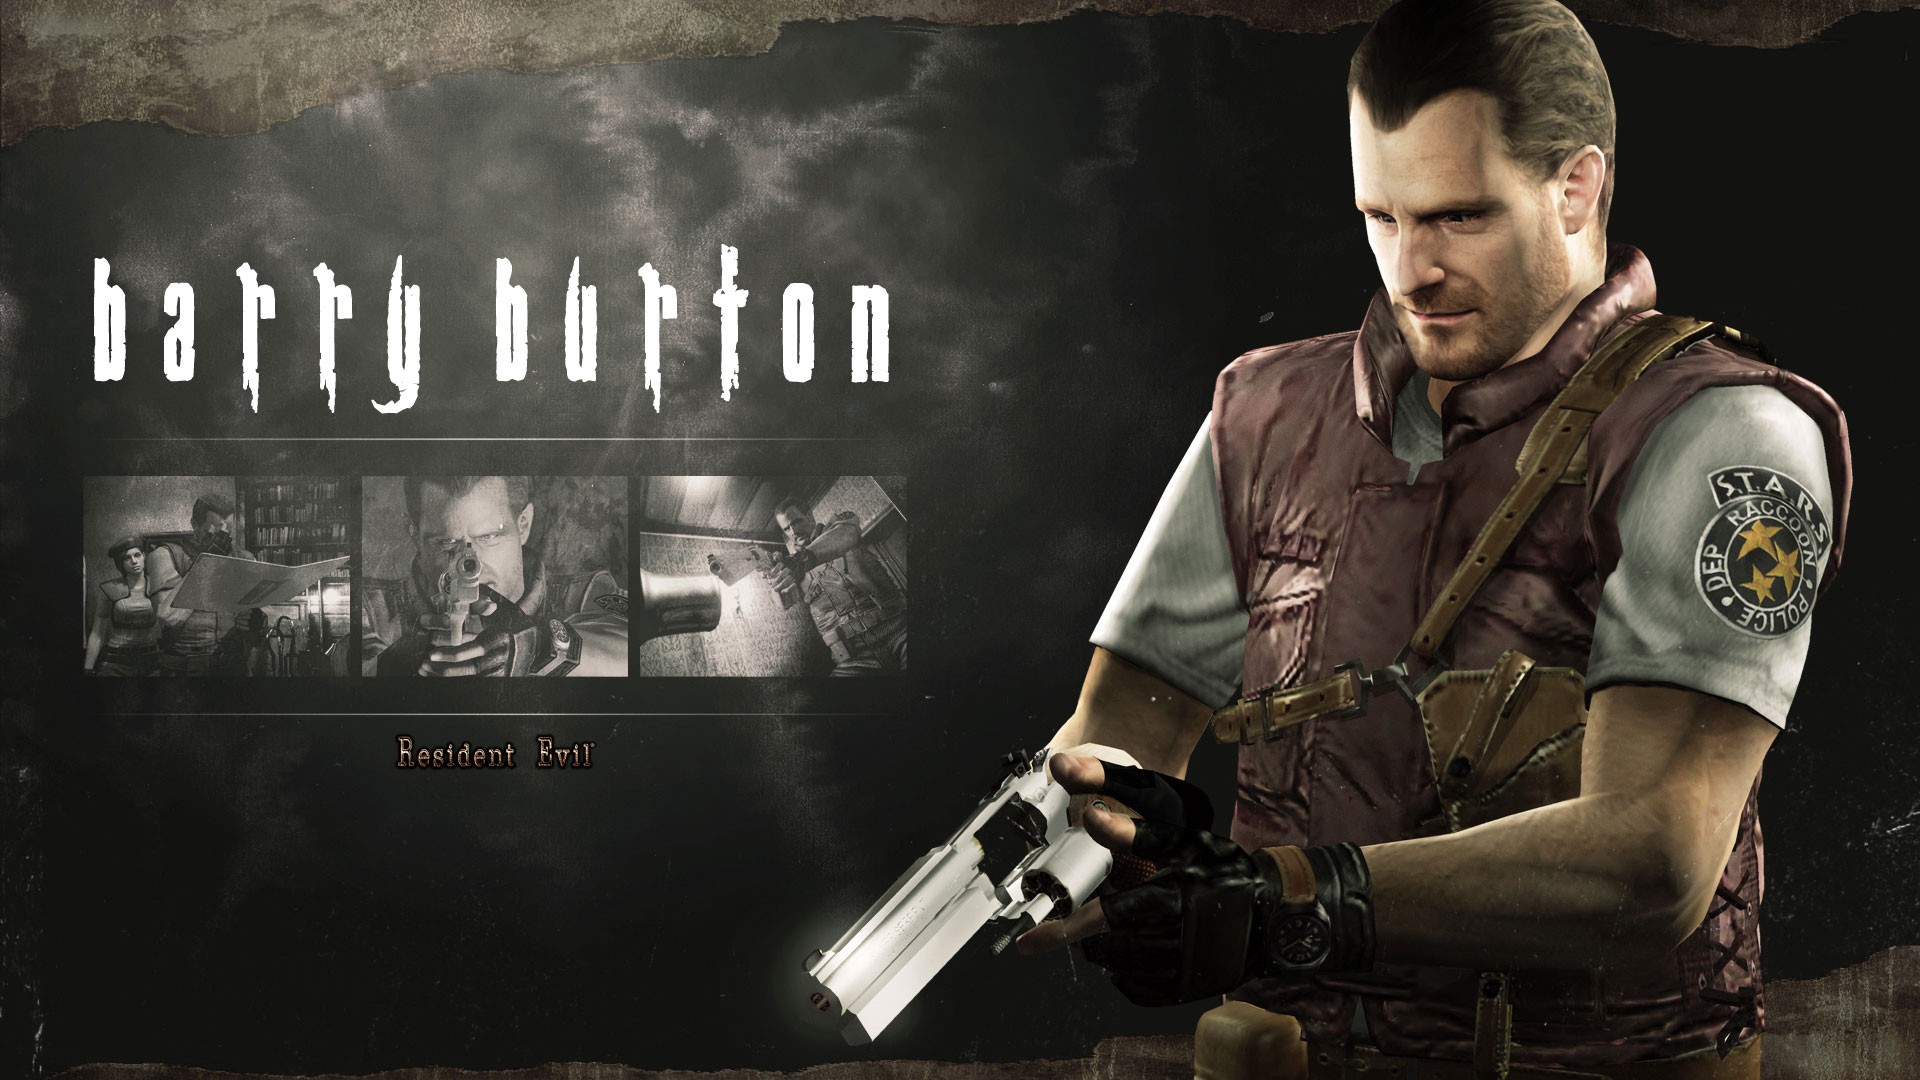 General 1920x1080 Resident Evil video games Resident Evil HD Remaster Barry Burton video game men weapon gun Capcom video game characters